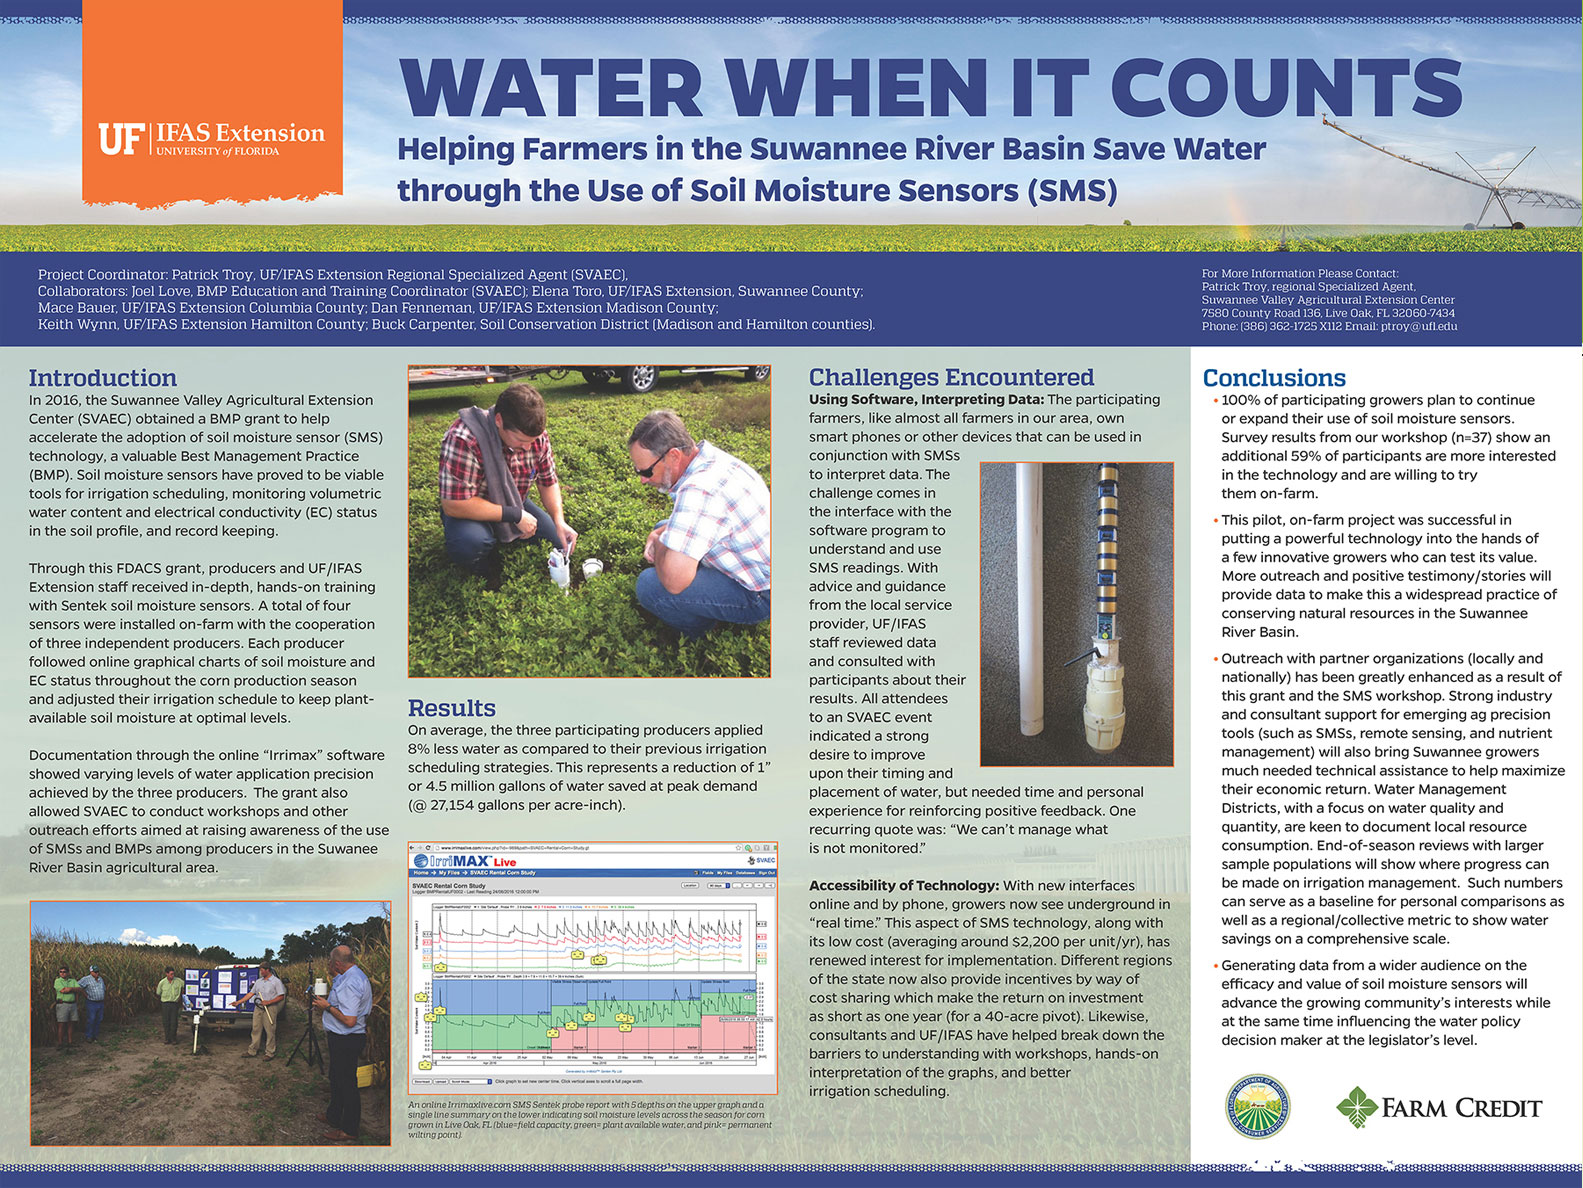 Water When it Counts Conference Poster UF/IFAS Communications